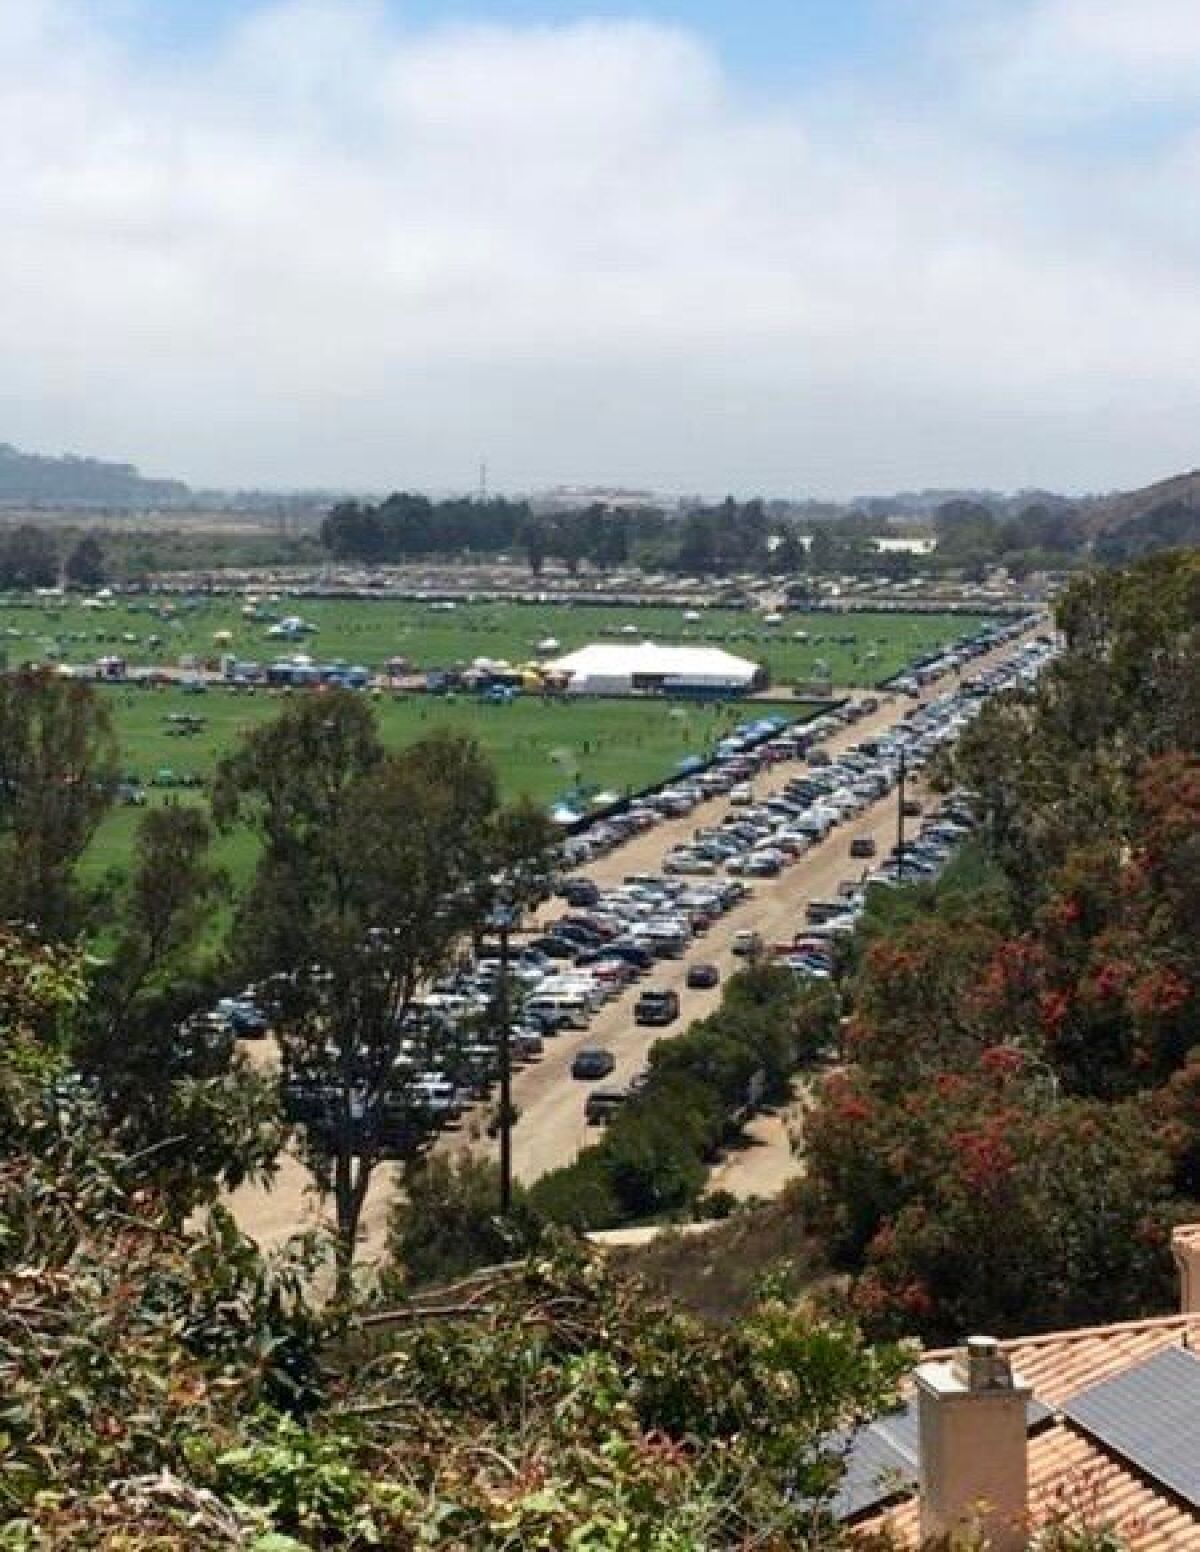 Looking down on Surf Cup Sports Park from the residences above.